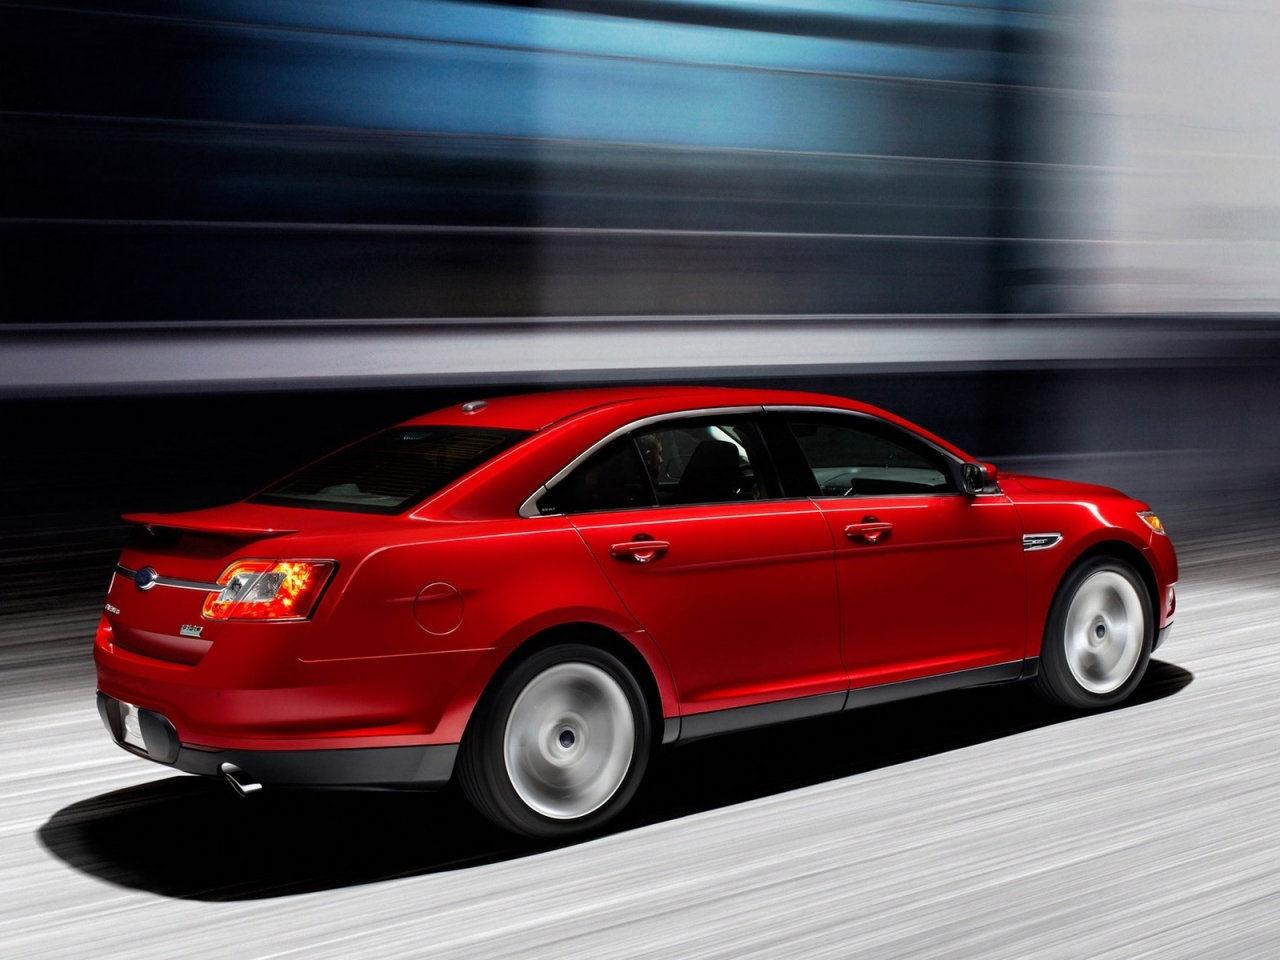 Ford Taurus SHO 2010 for 1280 x 960 resolution